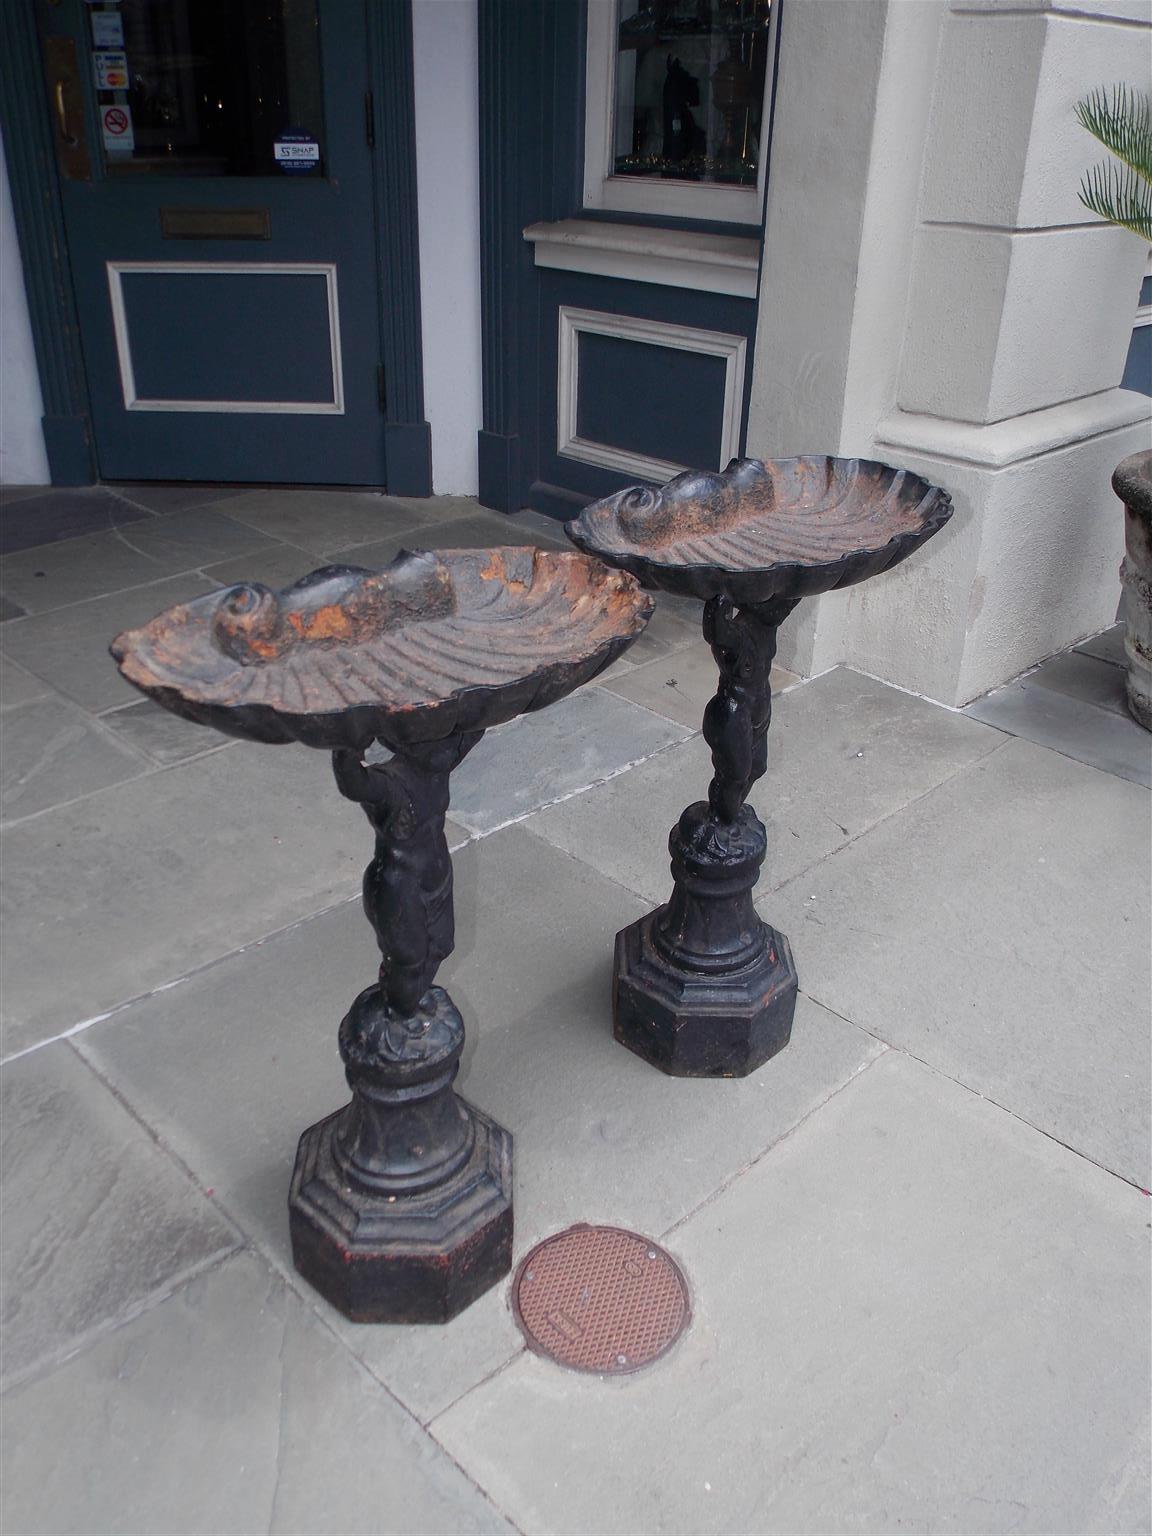 Pair of French cast iron painted figural cherub bird baths with flanking shell form bowls, and resting on a circular ringed octagonal plinths. Mid-19th century

Pair of bird baths are 32.25 Tall / 21 Wide at top / 13.25 Deep at top / 11 Square at